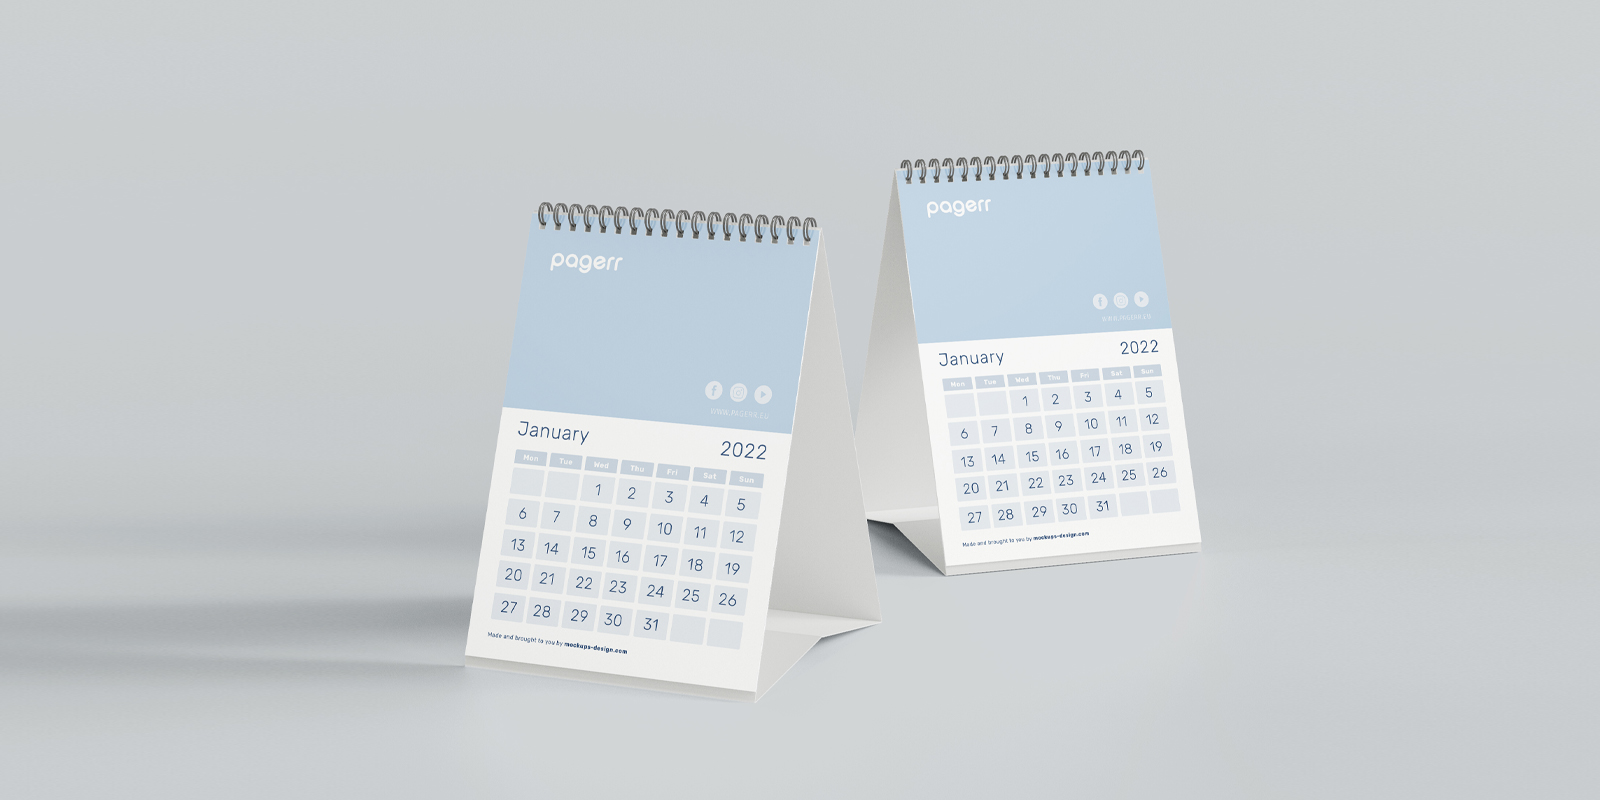 Desk calendars in Melbourne - Print with Pagerr